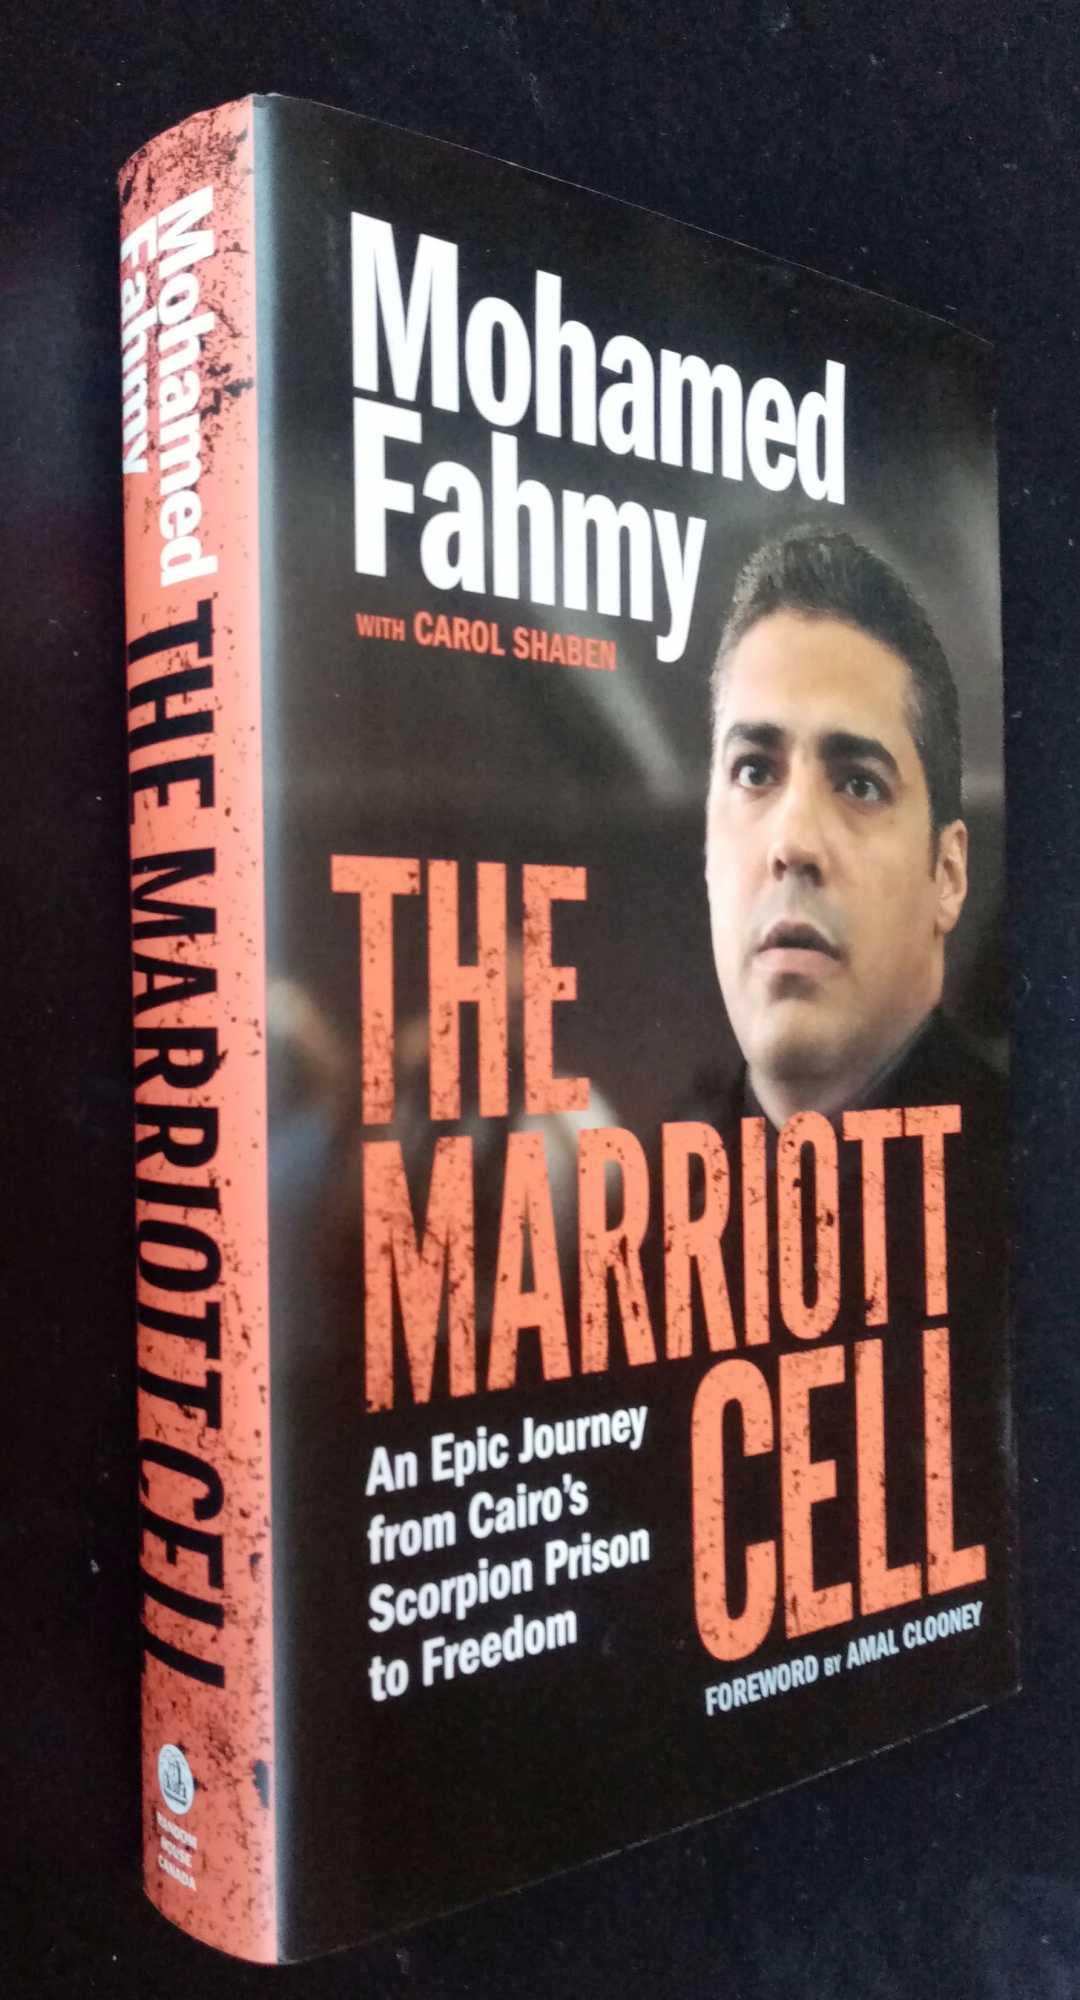 Mohamed Fahmy - Marriott Cell, The: An Epic Journey from Cairo's Scorpion Prison to Freedom